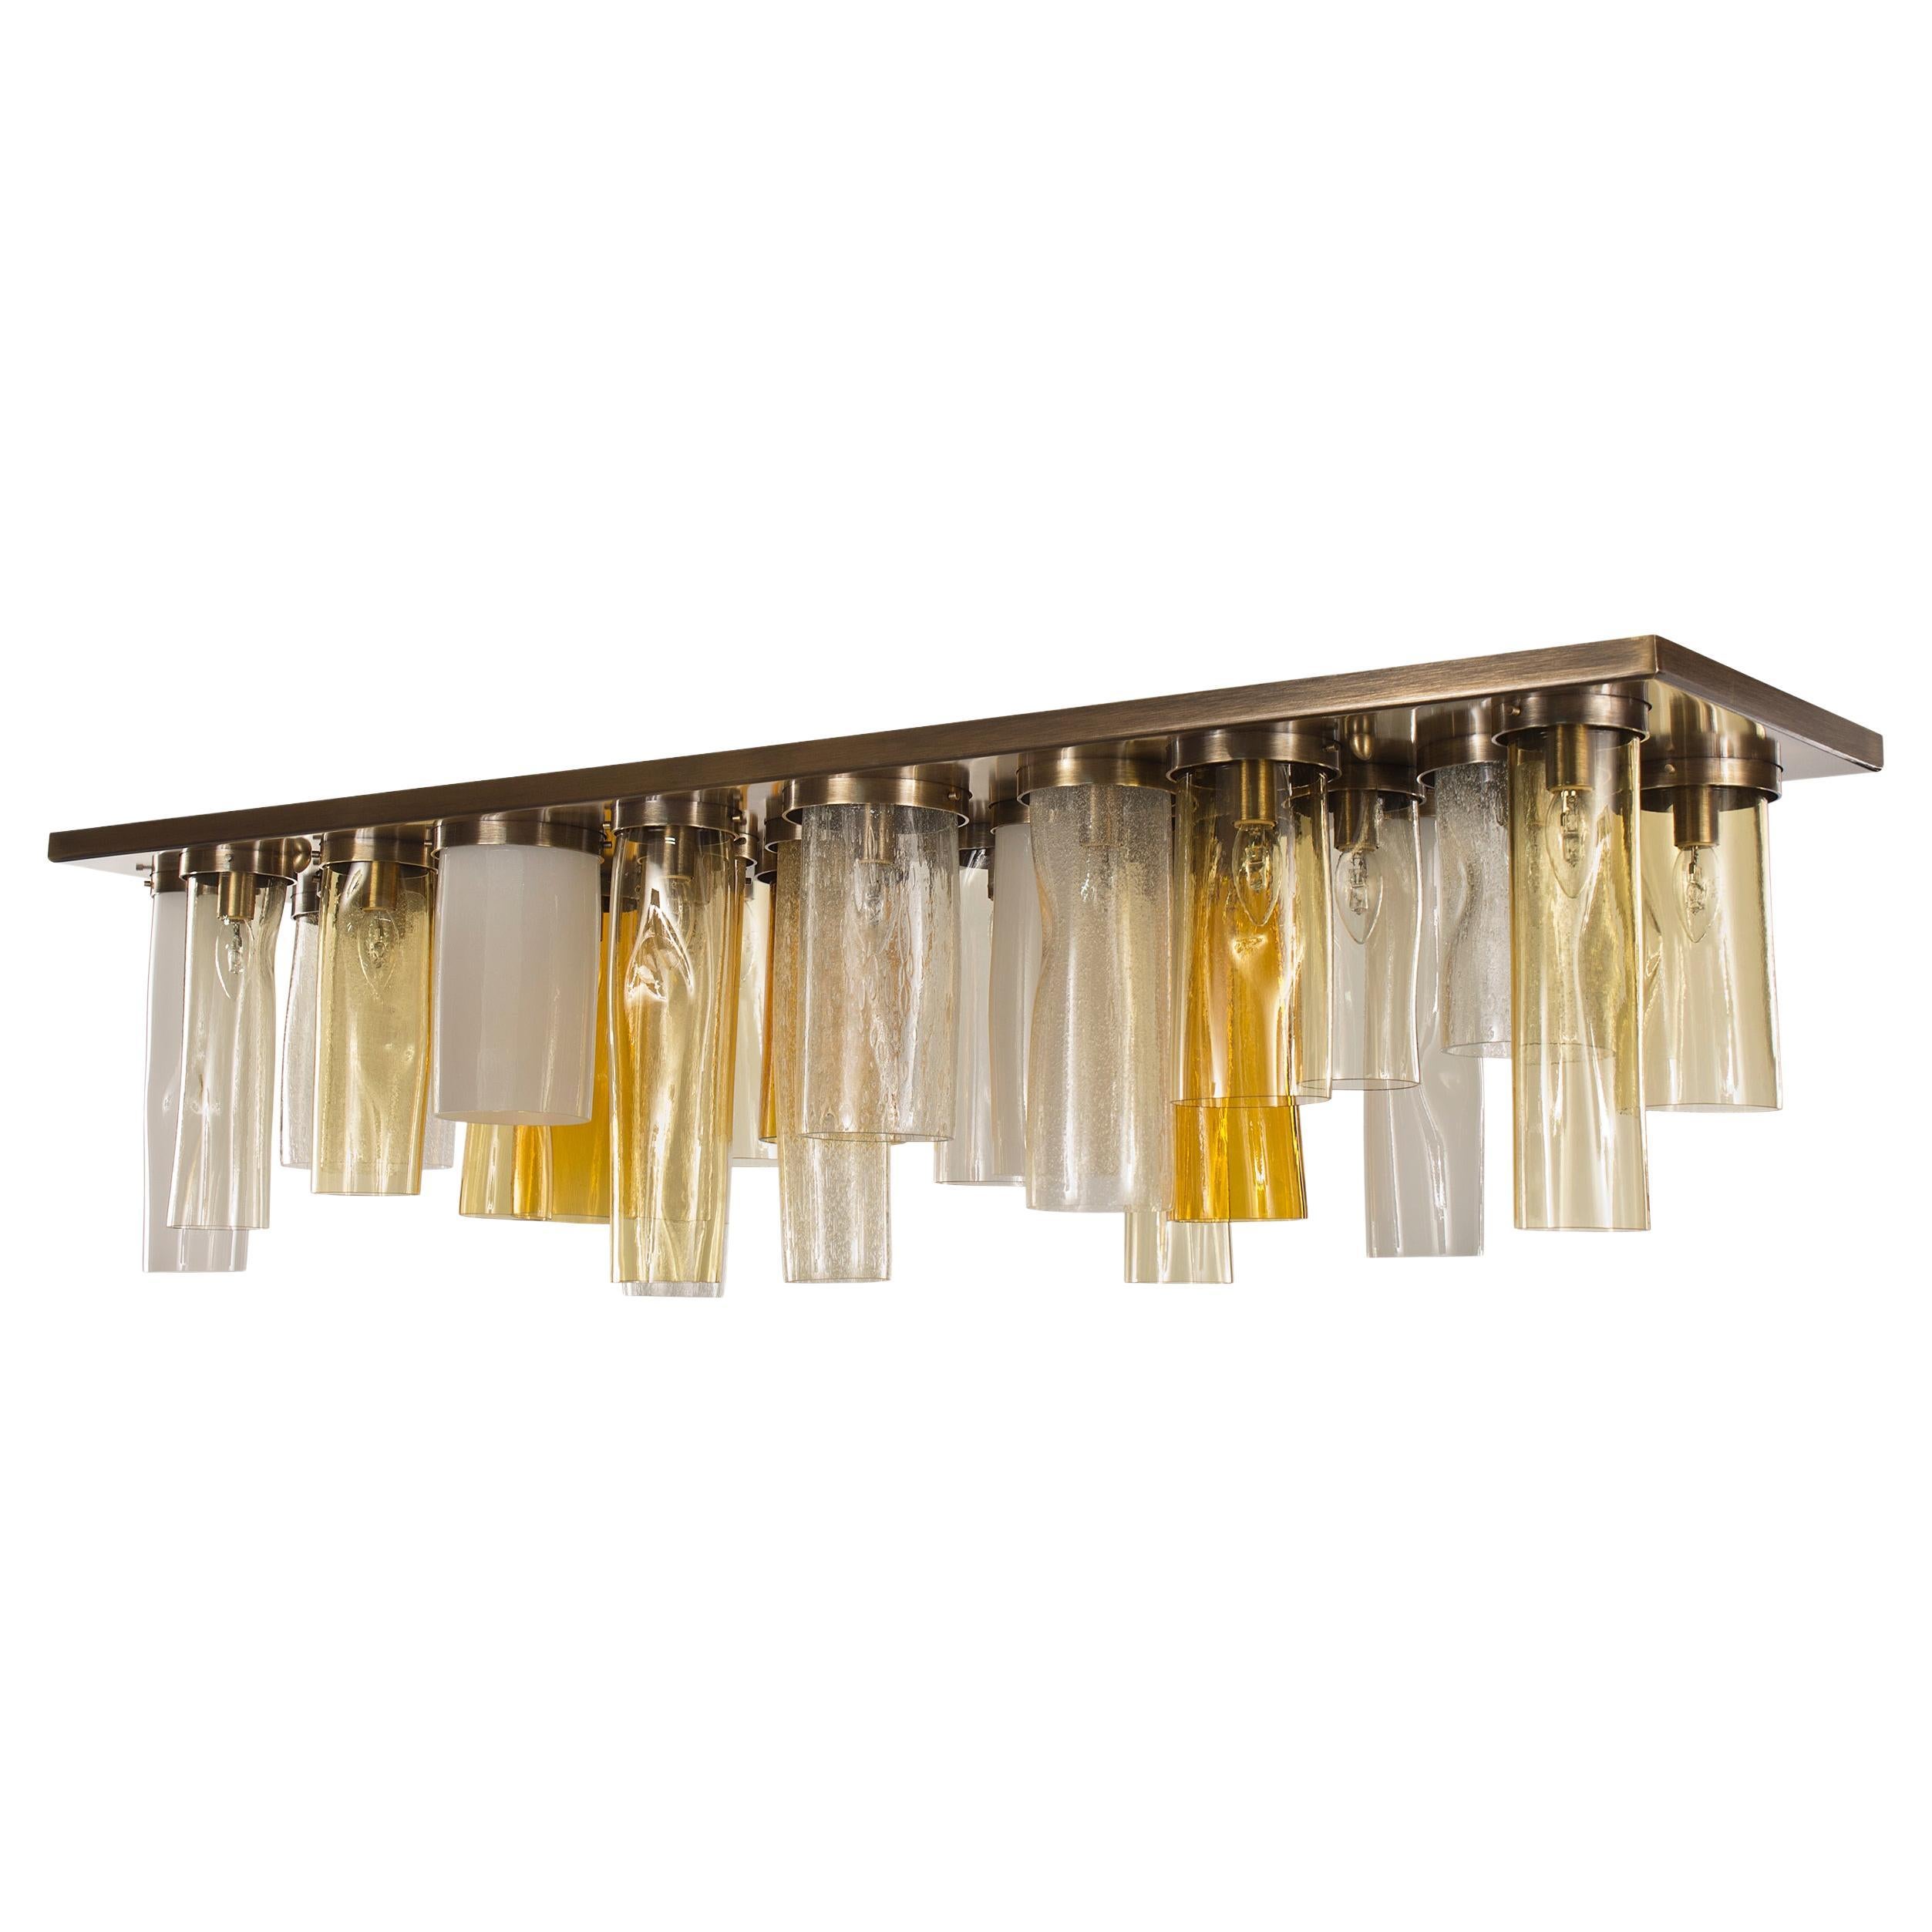 Artistic Suspension Mixed Amber Glass Tubes Skyline by Multiforme